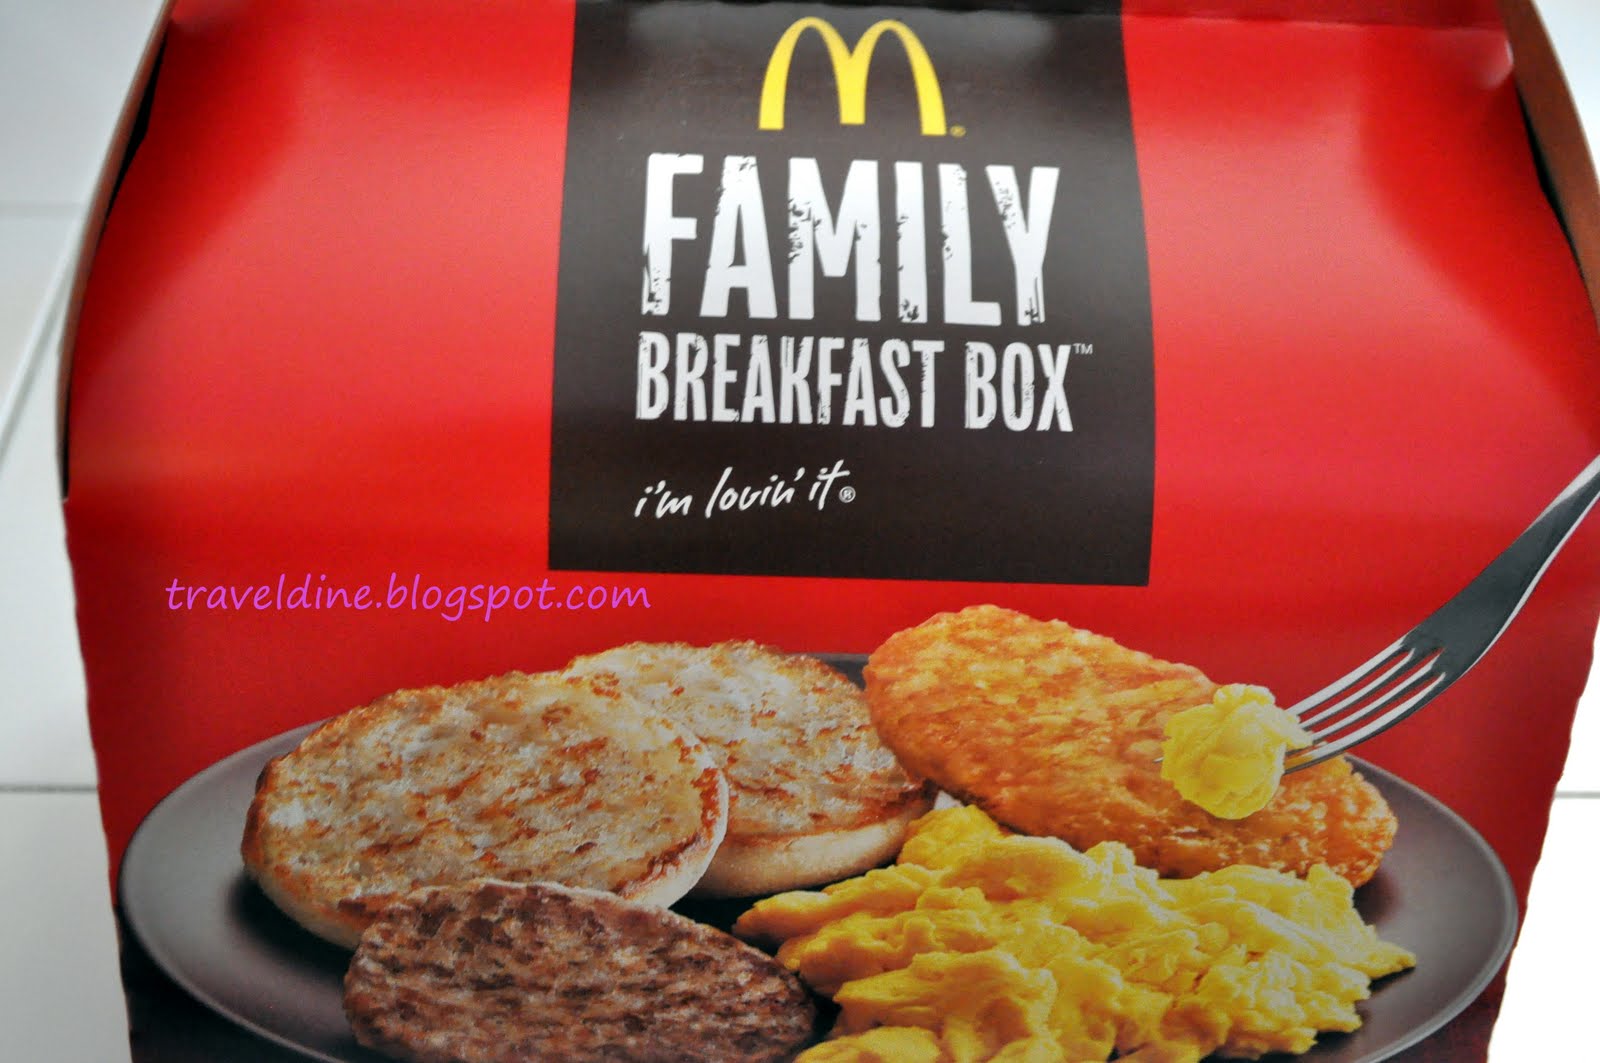 Travel and Dining Experience (Unboxing) McDonald's Family Breakfast Box